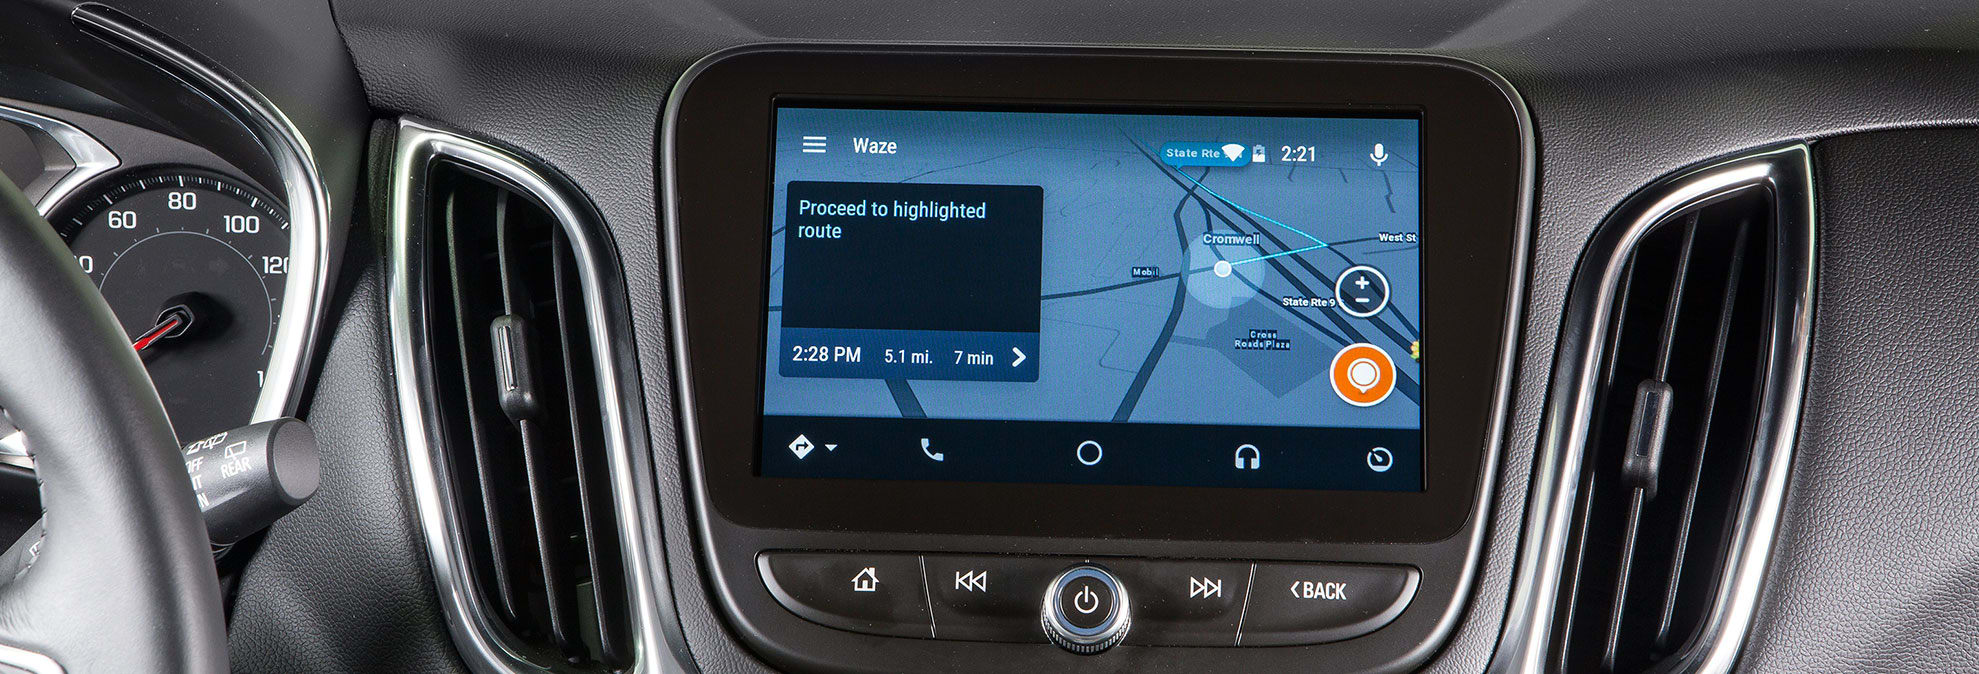 Android Auto - Consumer Reports